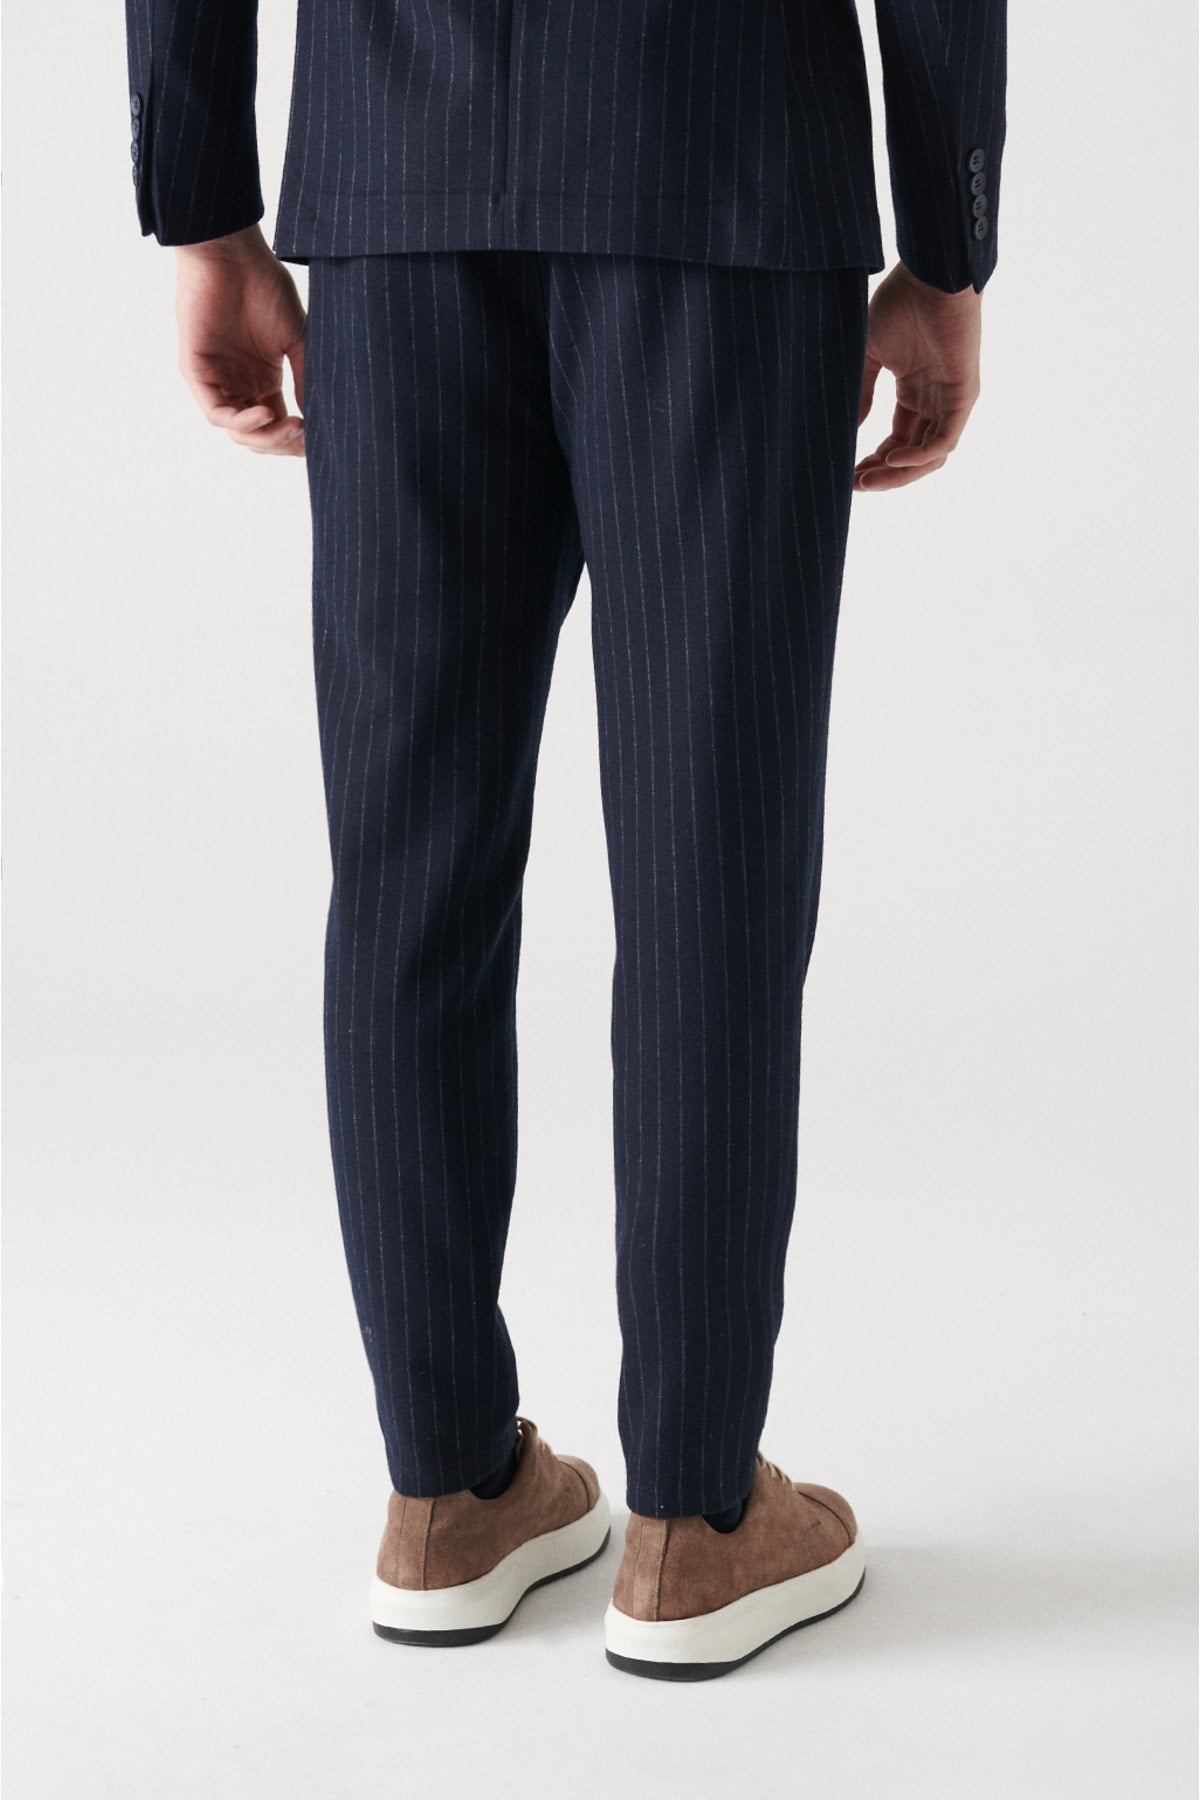 Navy blue woolen pleated striped relaxed fit suit pants